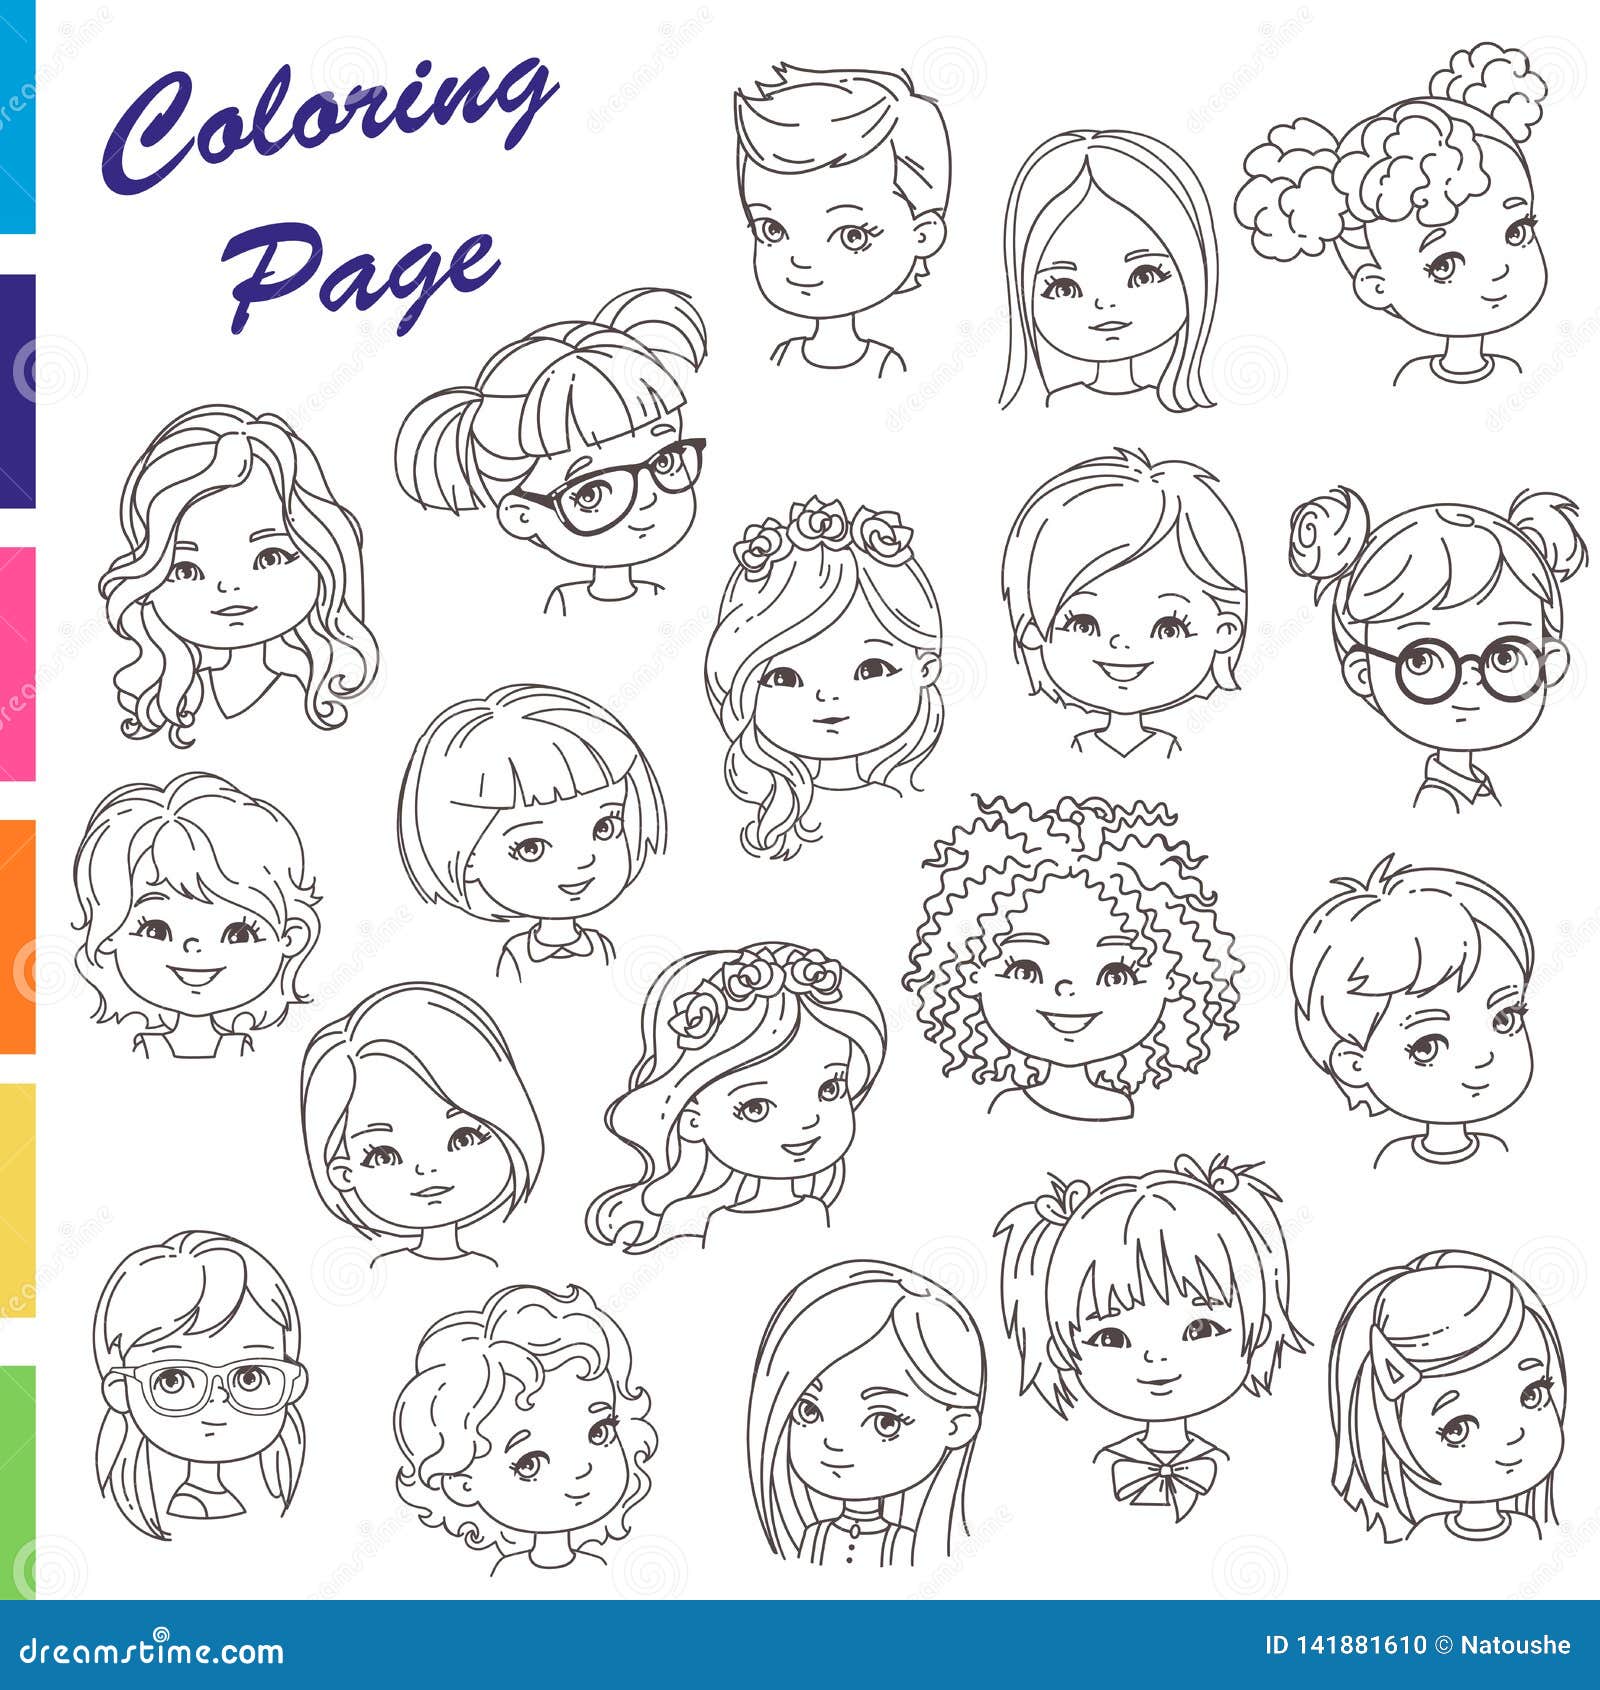 Download Hairstyle With Braid Coloring Page  Braided Hair Coloring Pages  PNG Image with No Background  PNGkeycom